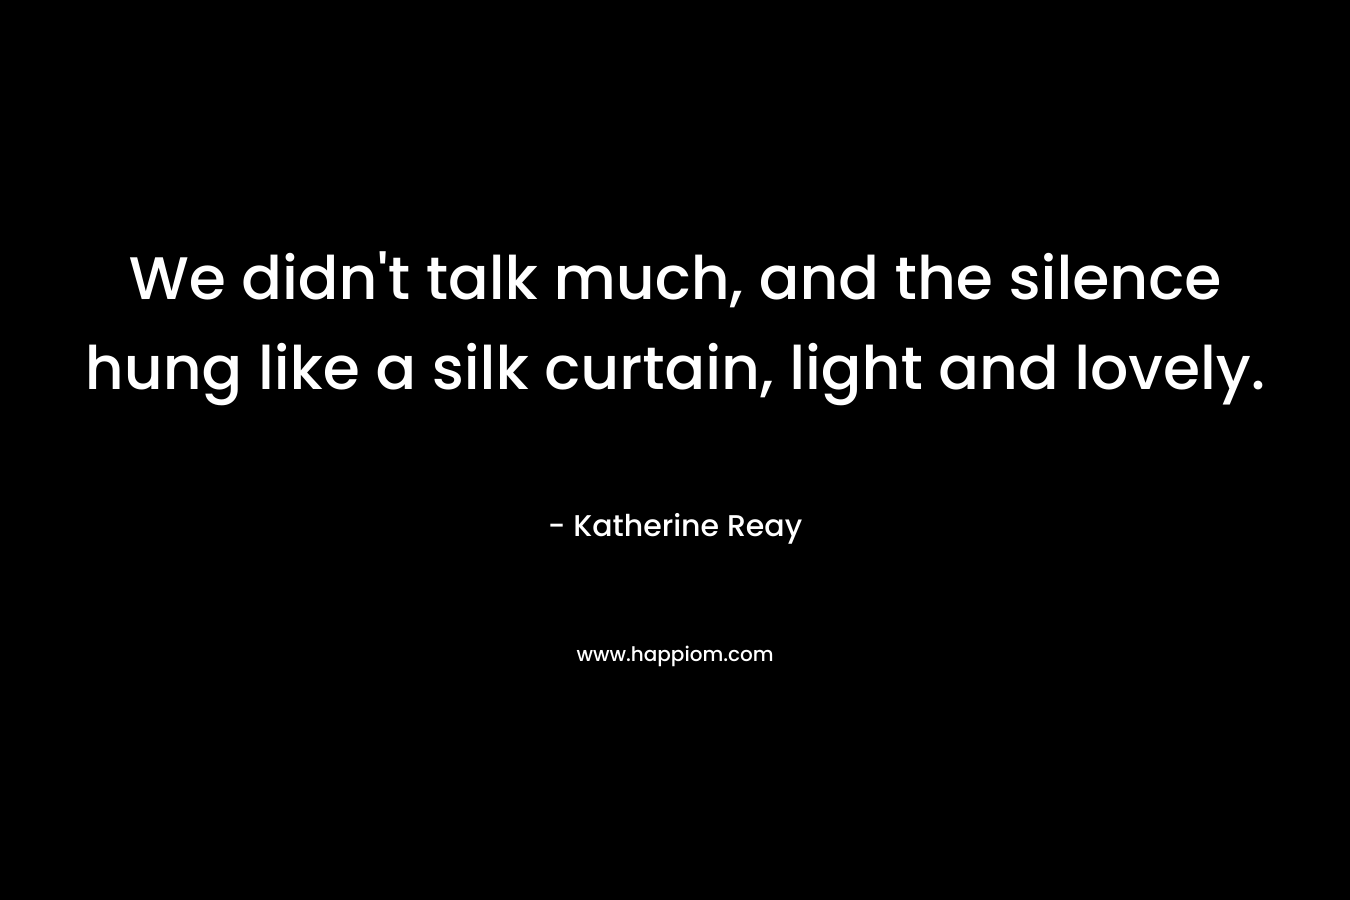 We didn’t talk much, and the silence hung like a silk curtain, light and lovely. – Katherine Reay